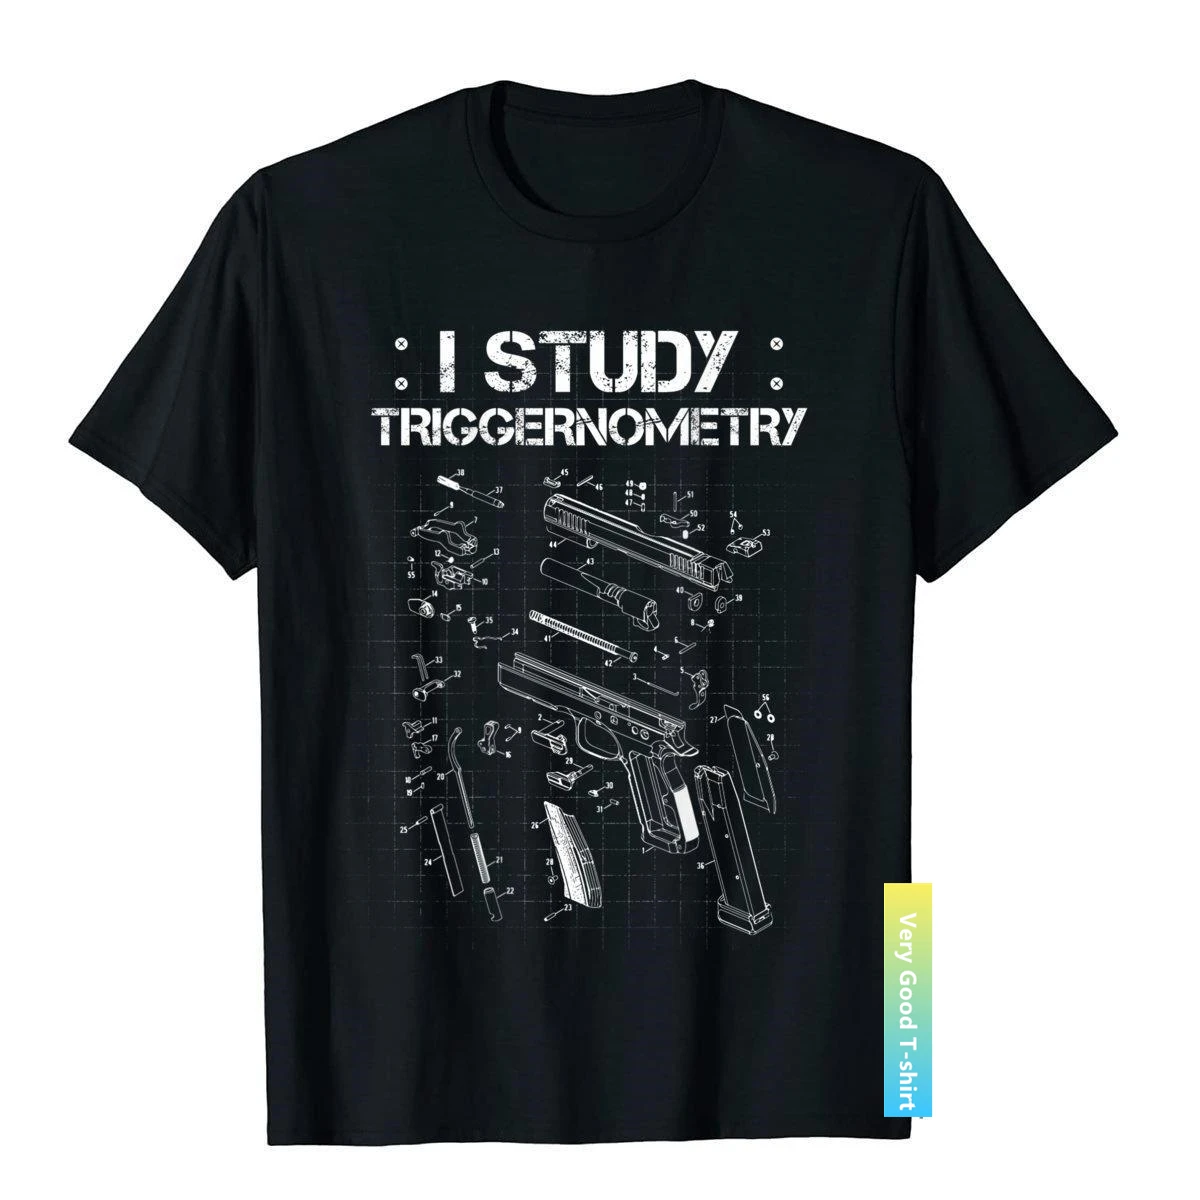 

I Study Triggernometry On Back Gun Funny Gift T-Shirt Cotton T Shirt For Men Tight Top T-Shirts 3D Printed Latest